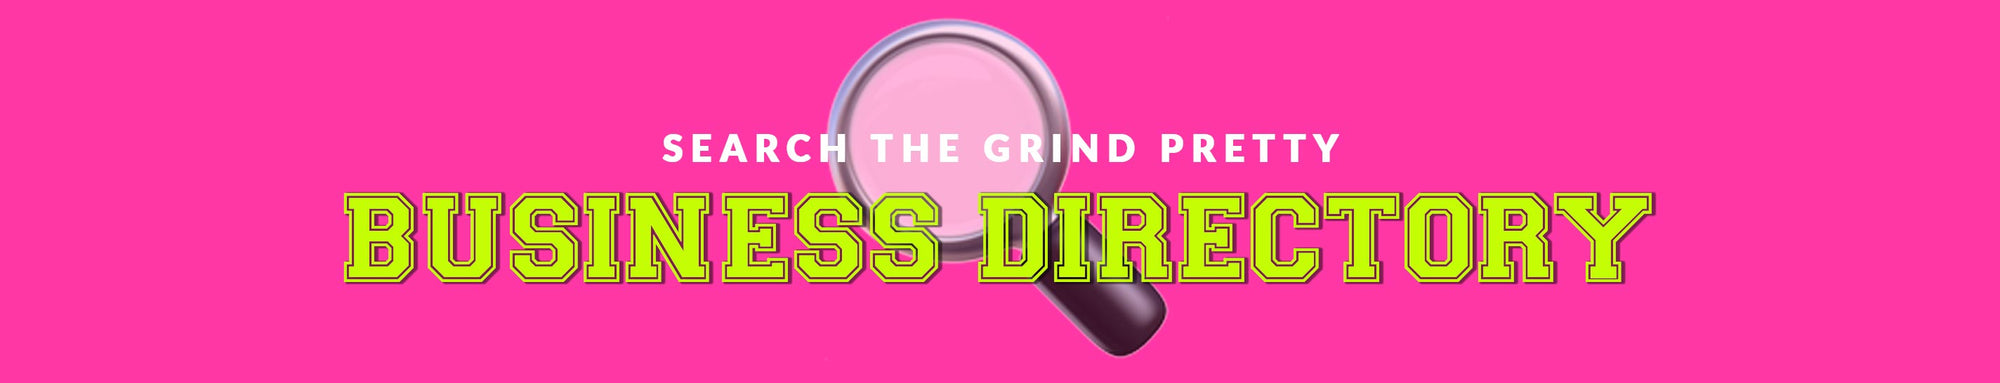 Search the Grind Pretty Business Directory